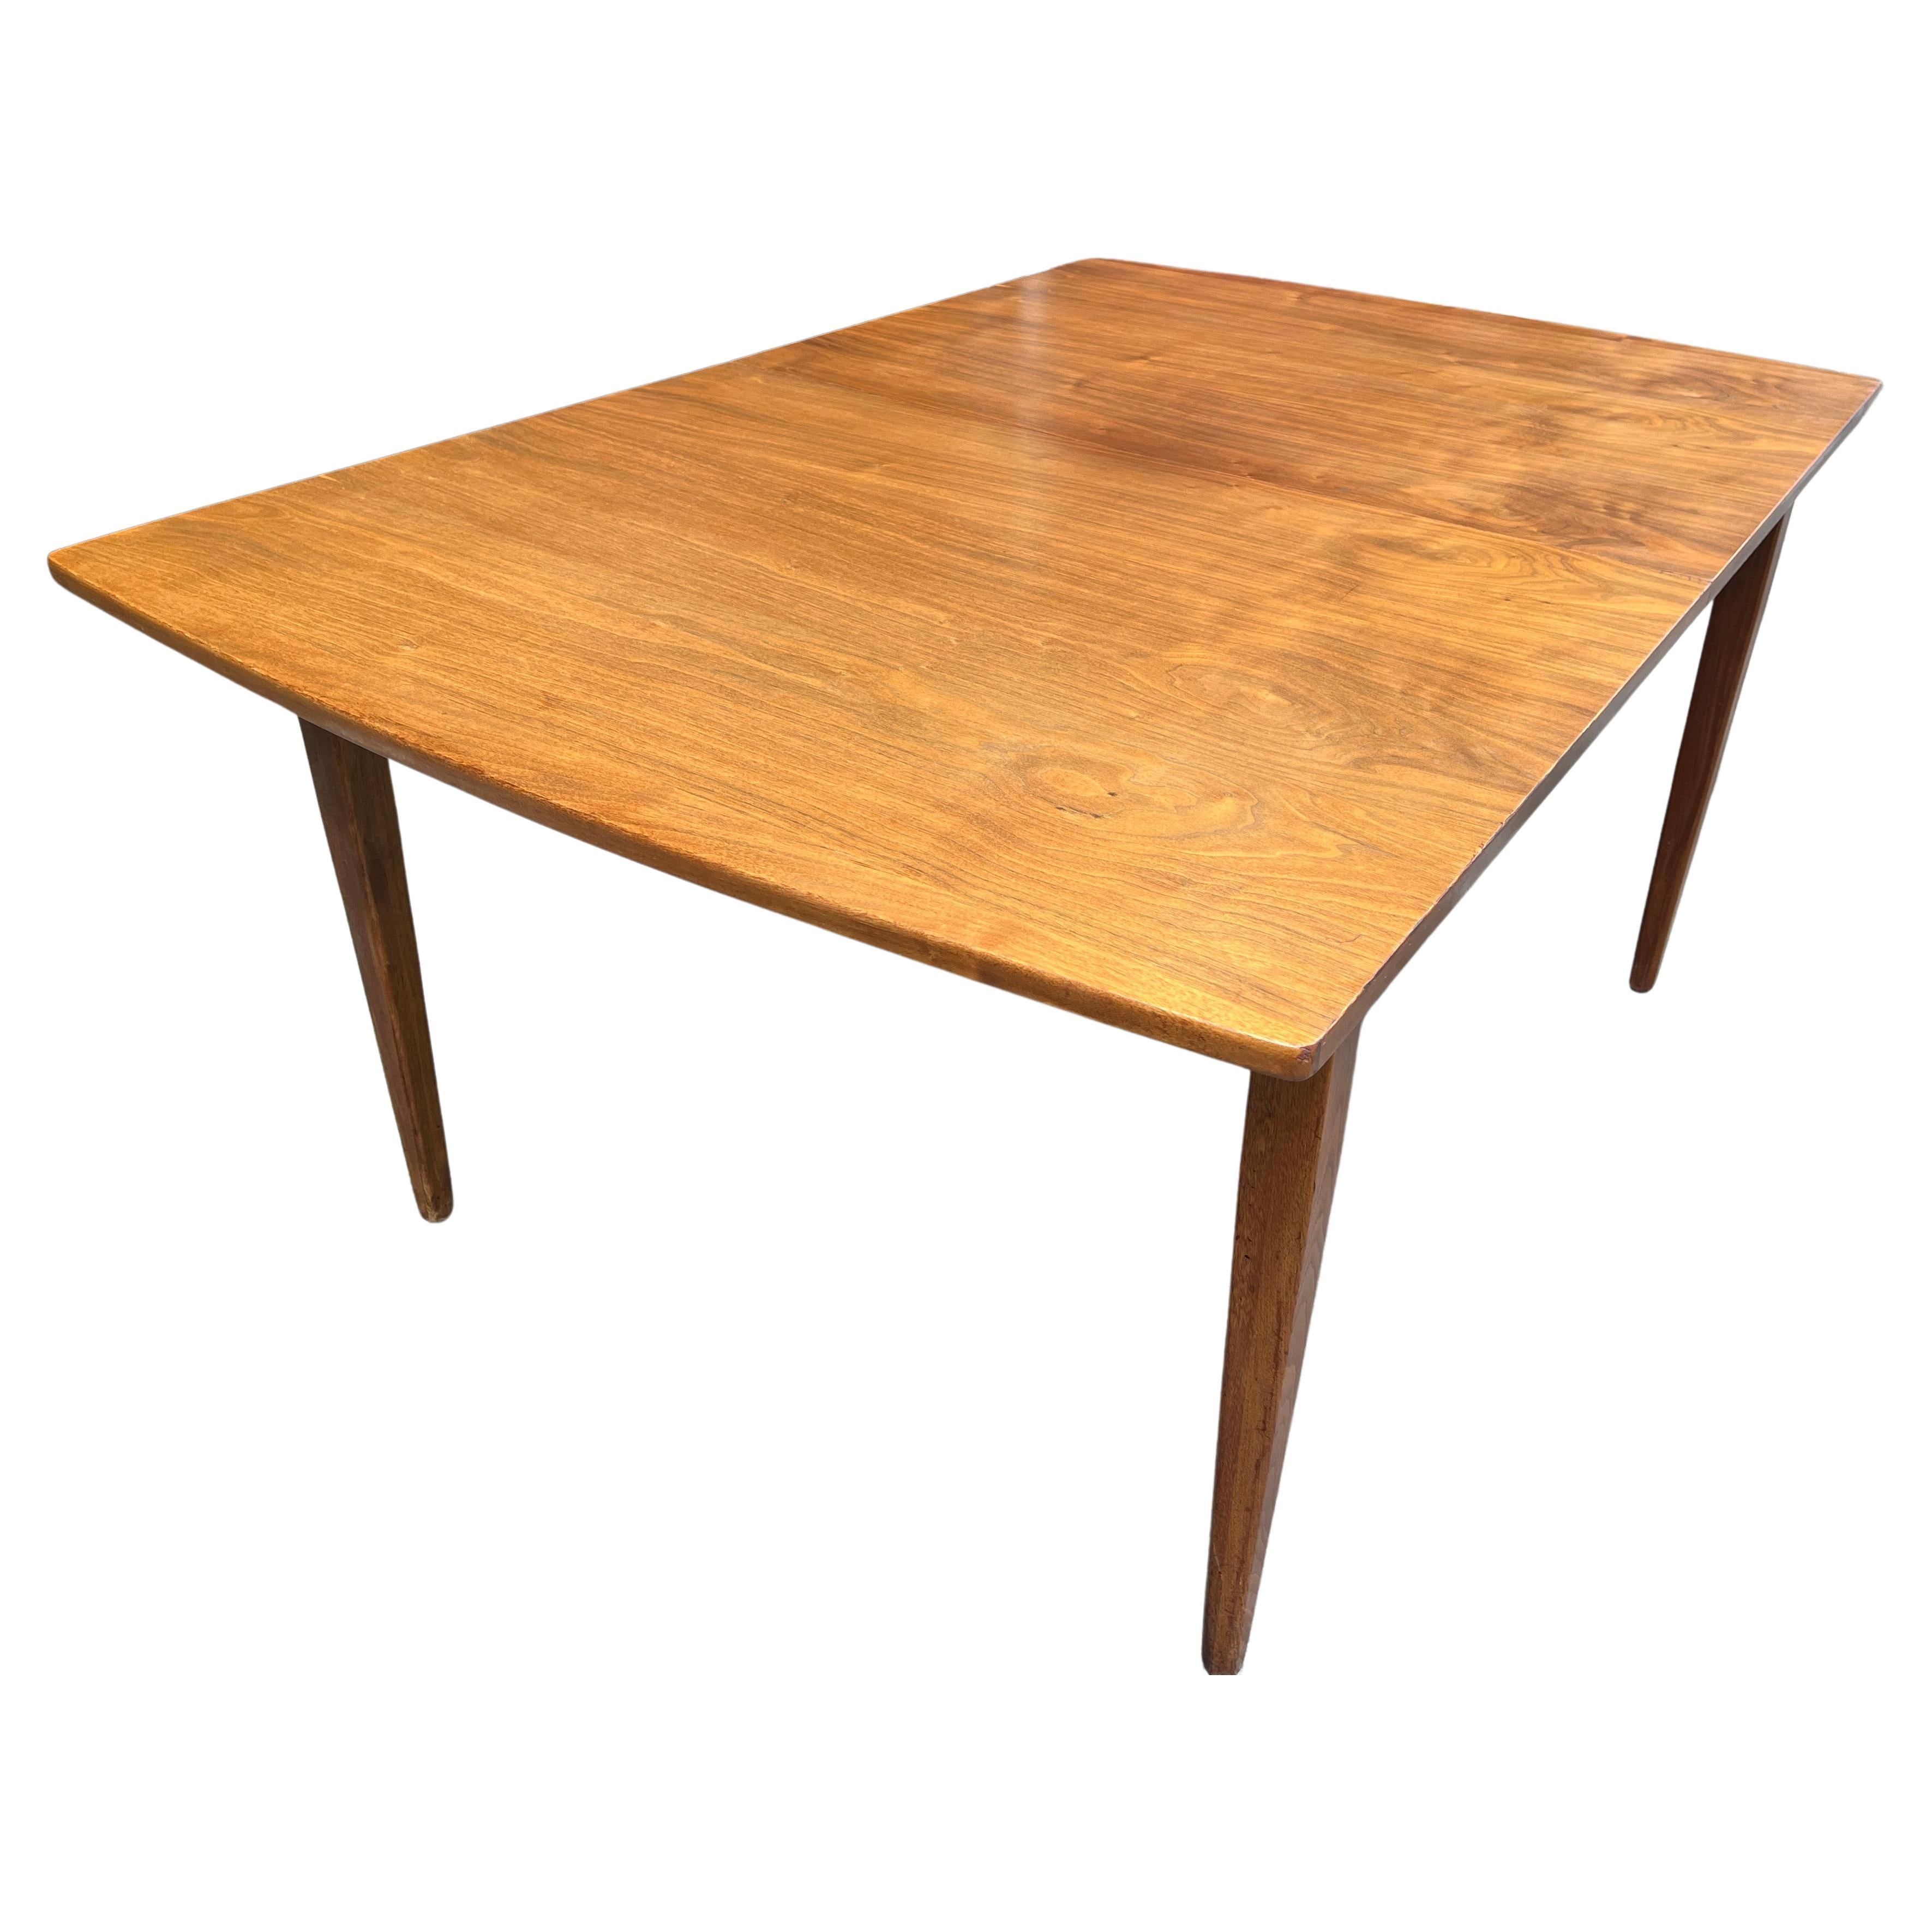 Kipp Stewart for Drexel Declaration Mid Century Walnut Dining Table. Original vintage condition with alight wear and finish. well cared for and ready for use. 
No extensions leaves.

knee hole 26.5.